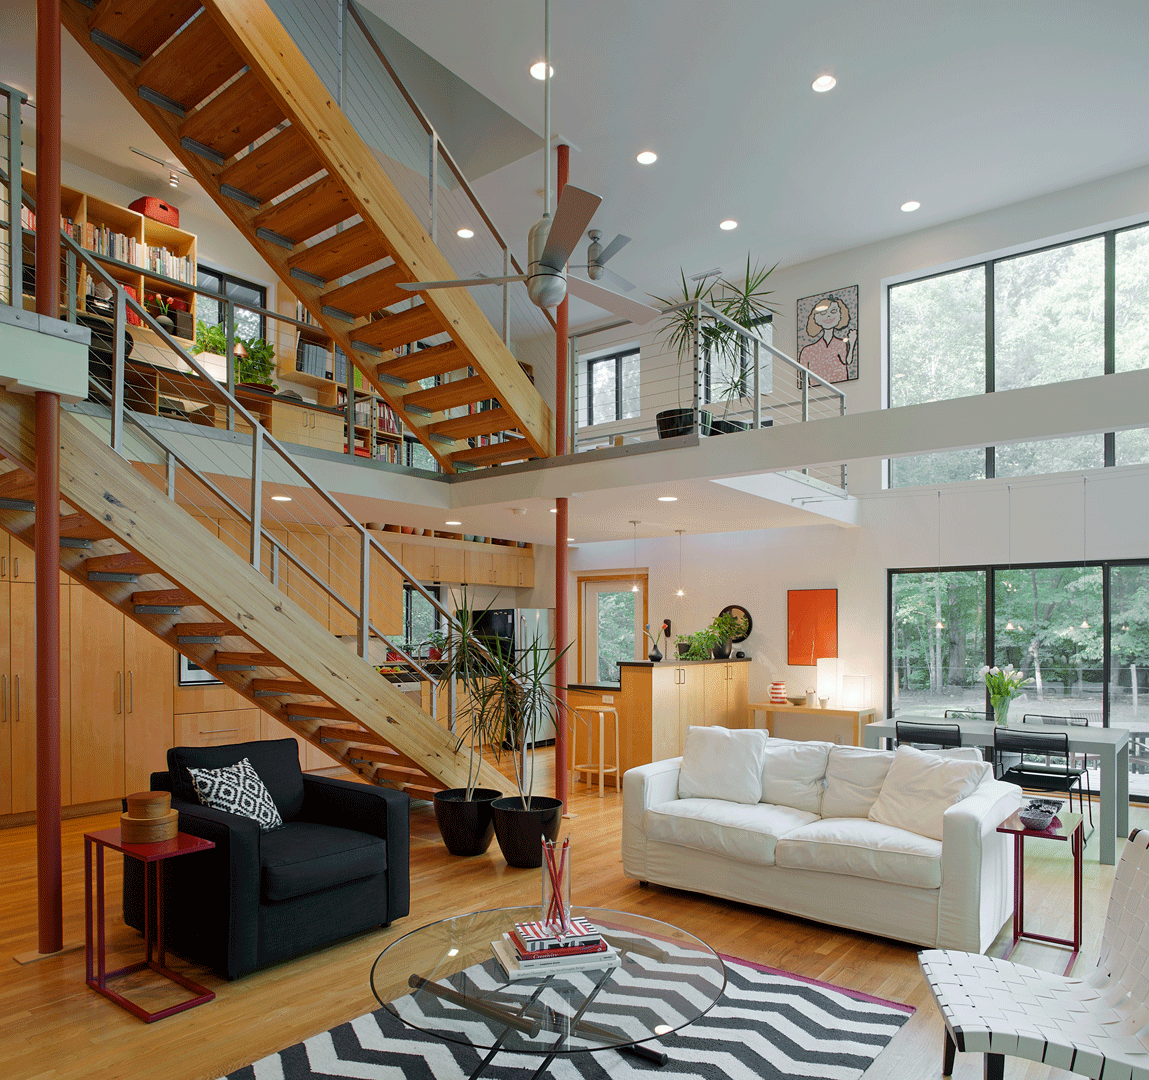 Eclectic furniture and art fill this creative and dramatic space. Large bands of windows illuminate the open living space while a cozy kitchen is tucked under an upstairs loft.